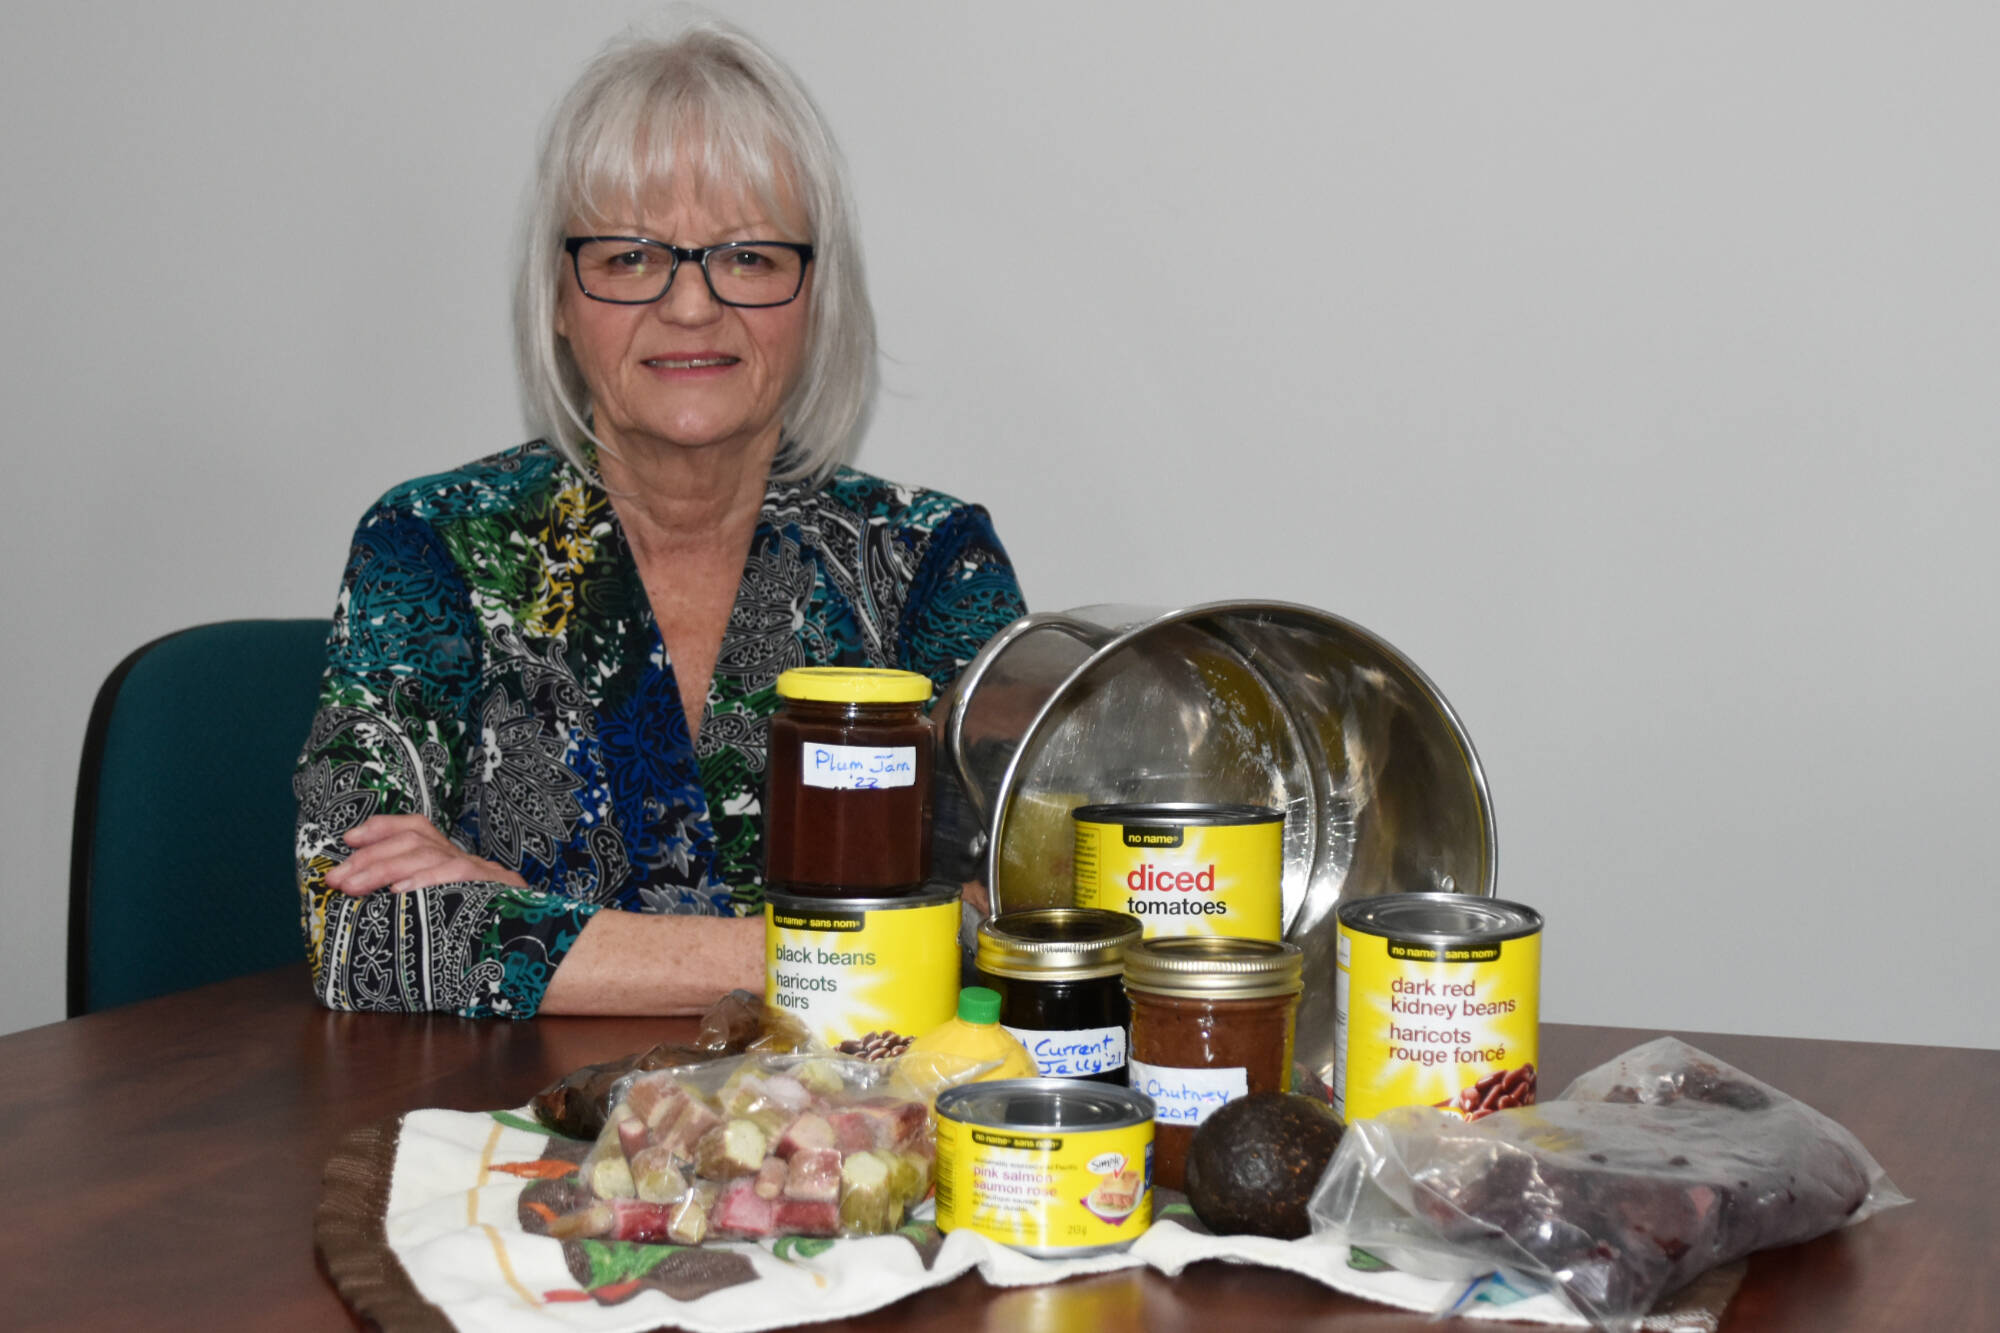 Salmon Arm’s Nan Gray sits with some of her preserves, ‘yellow’ cans, and bags of frozen foods, which have been staples of her frugal diet for years. (Martha Wickett - Salmon Arm Observer)